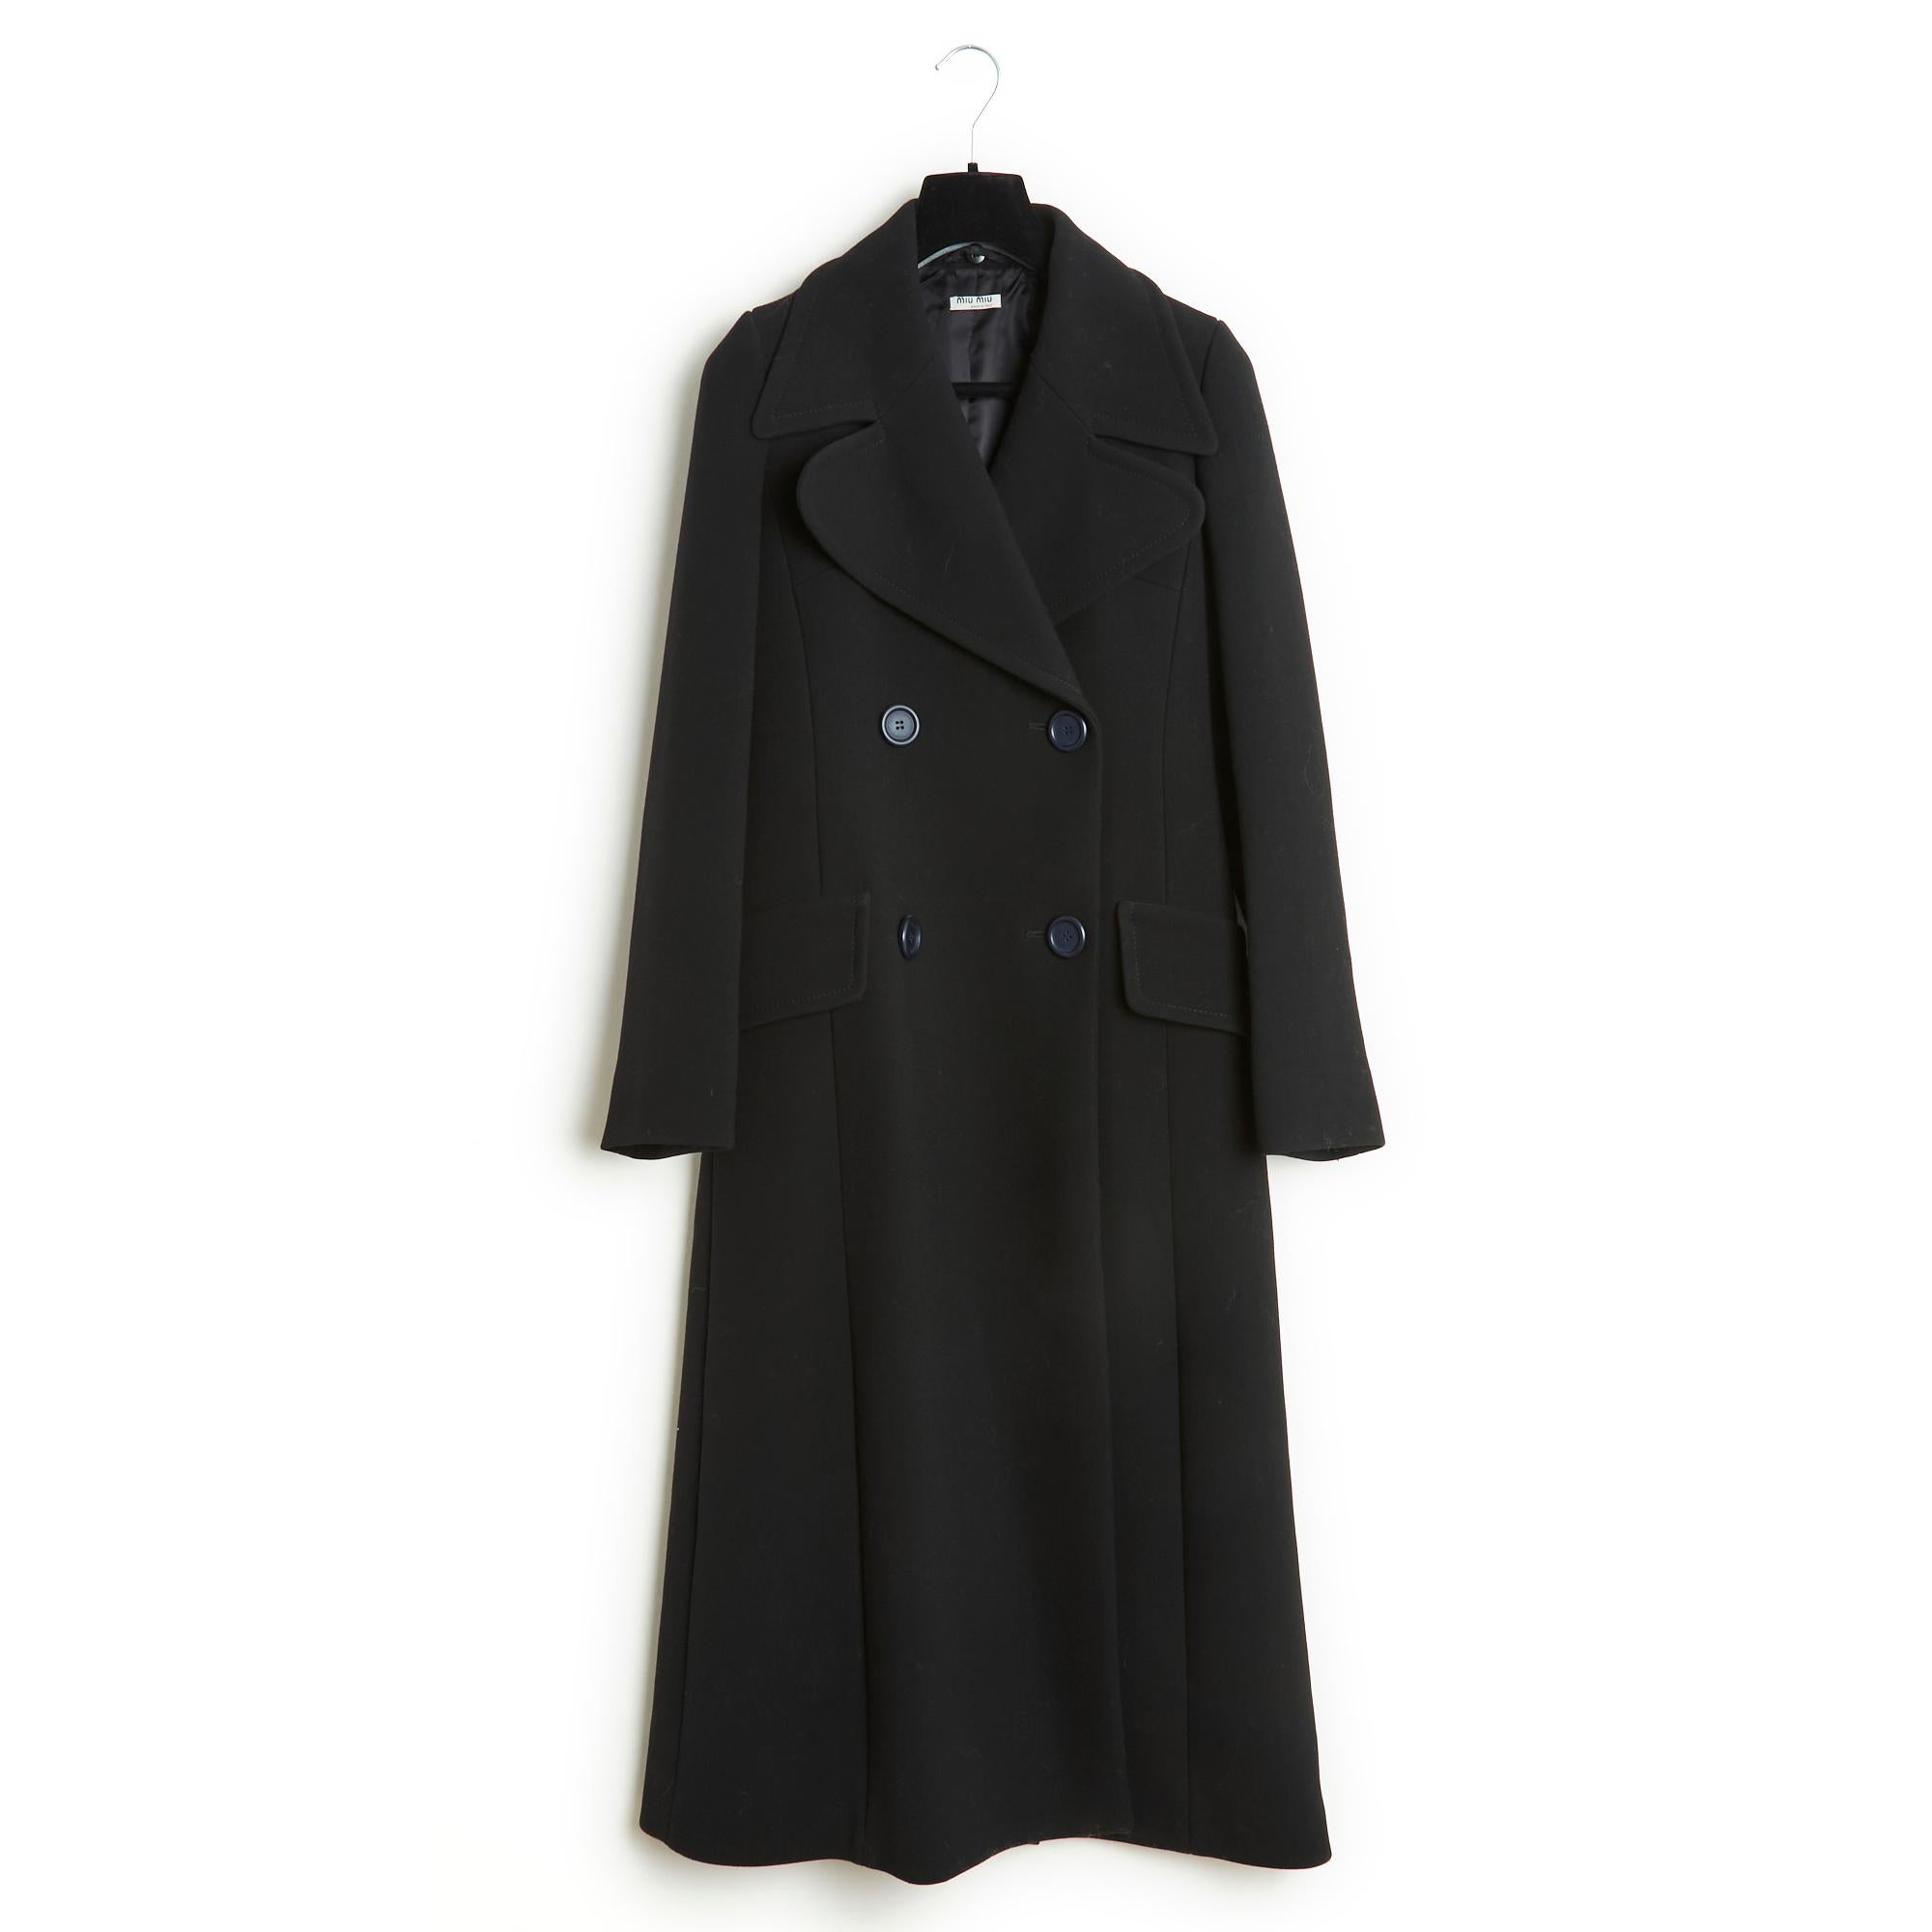 Miu Miu coat AW 2015 collection in thick black wool twill, wide notched collar partially covered with a removable tricolor smooth leather collar, double-breasted front, 2 flap pockets on the sides, long sleeves, long slit at the back, lining satin